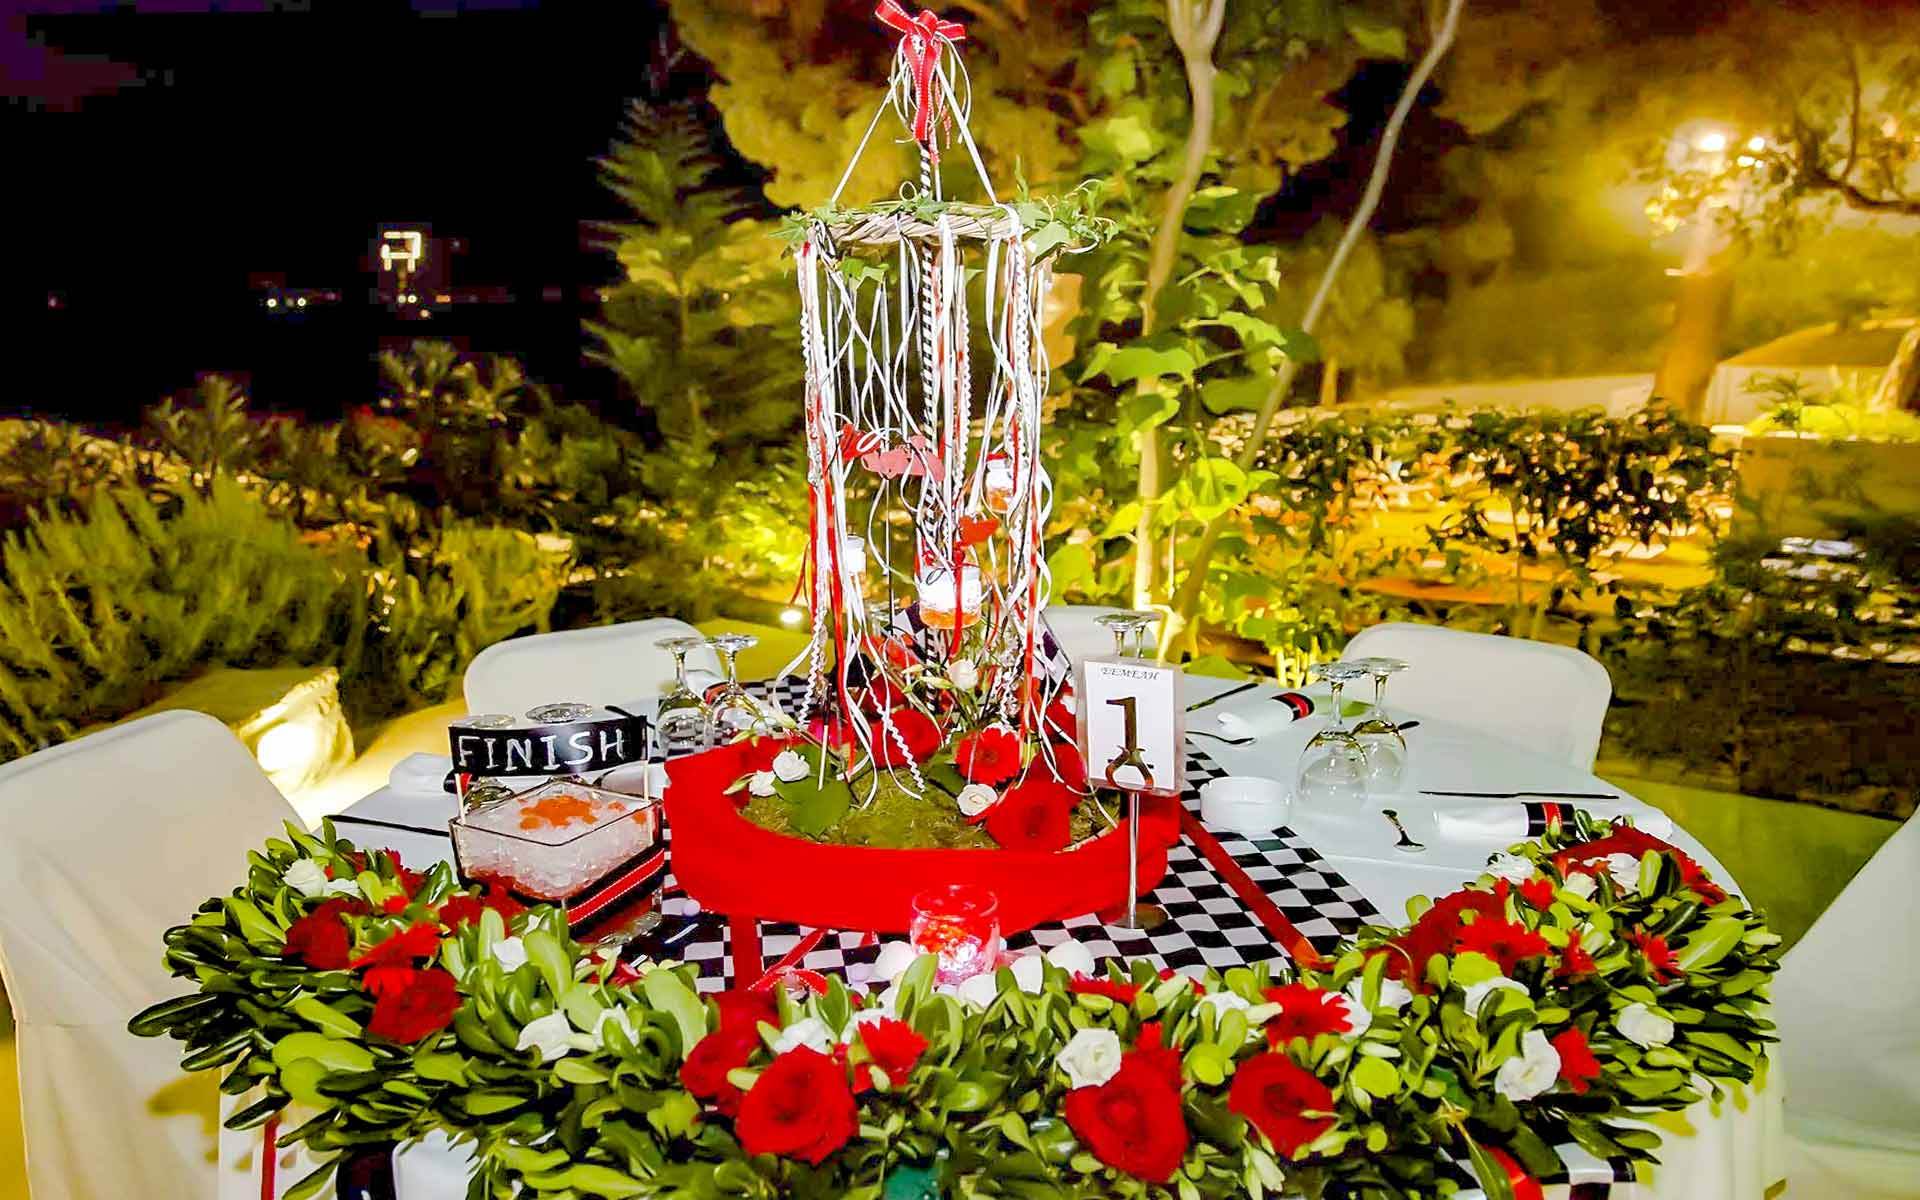 Find-The-Finish-Line-At-This-Race-Car-Themed-Reception